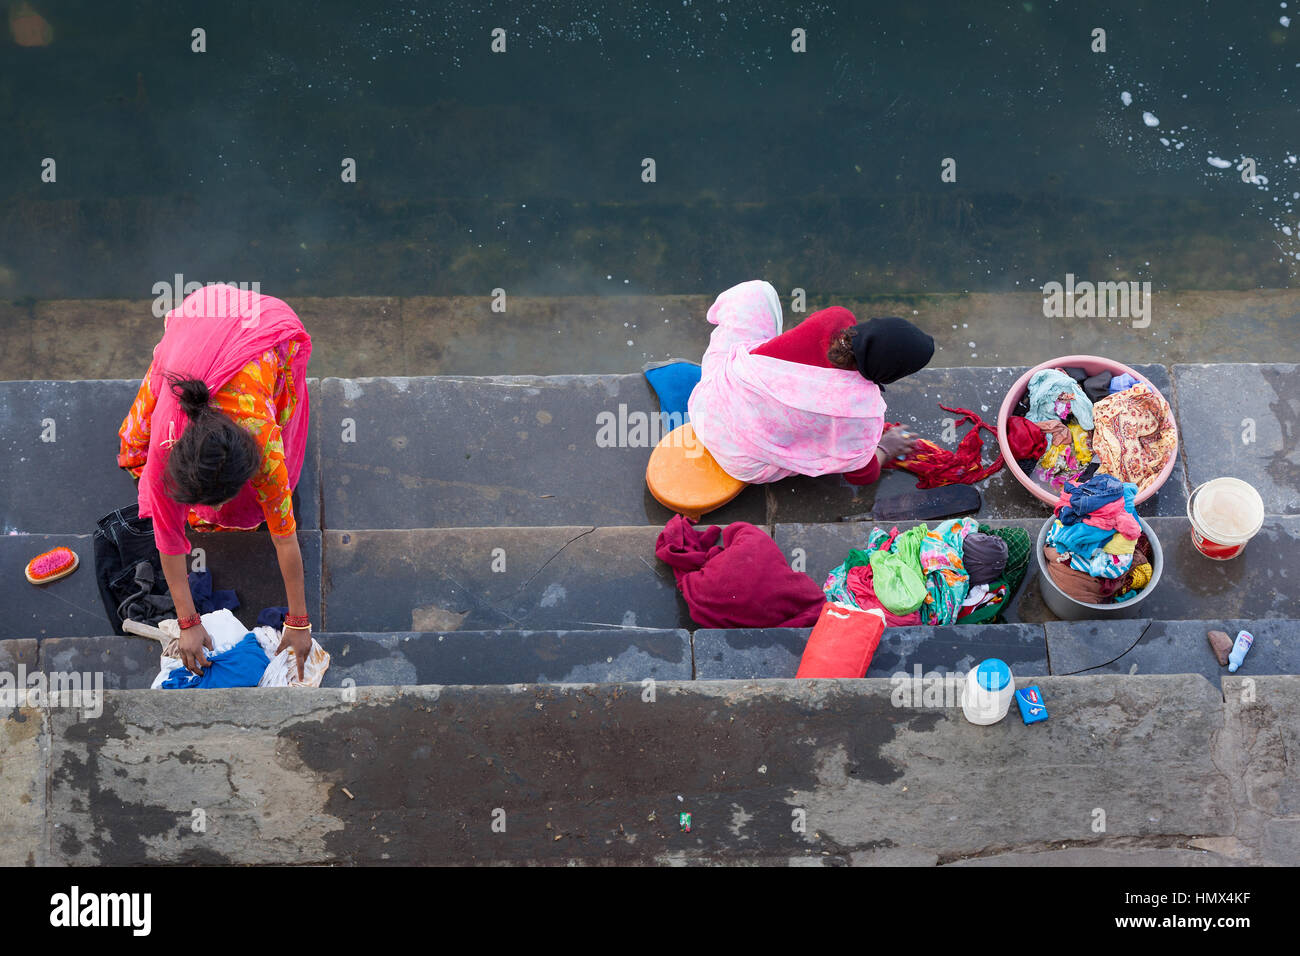 UDAIPUR, INDIA - JANUARY 16, 2015 : Aerial view of two women washing clothes on the steps of Lal Ghat next to Lake Pichola. Stock Photo